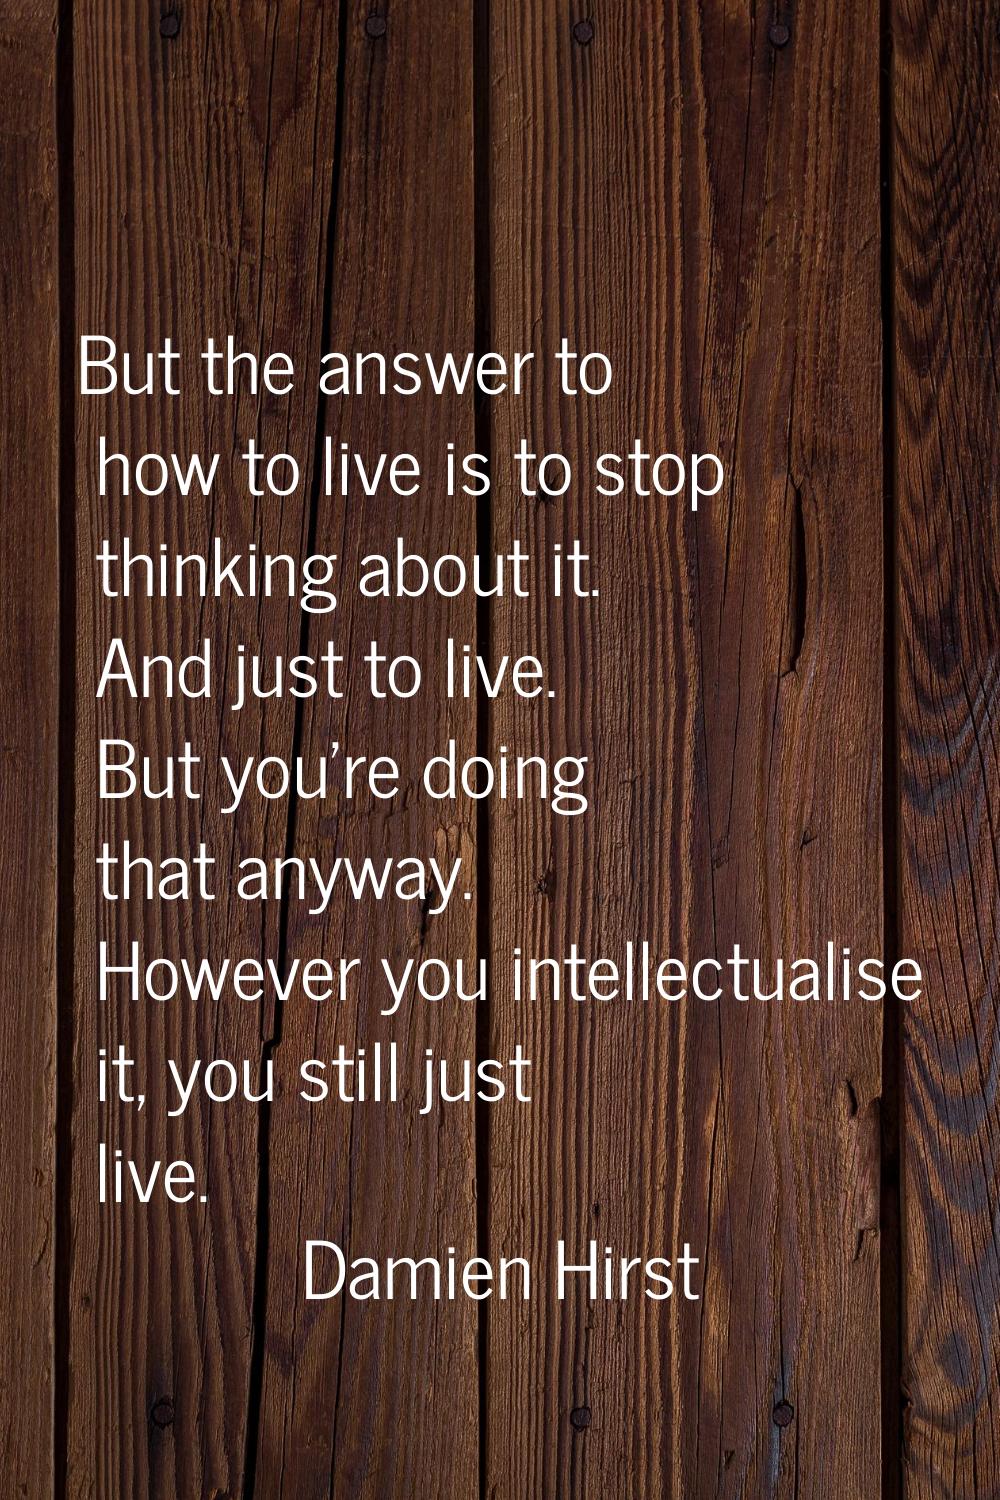 But the answer to how to live is to stop thinking about it. And just to live. But you're doing that